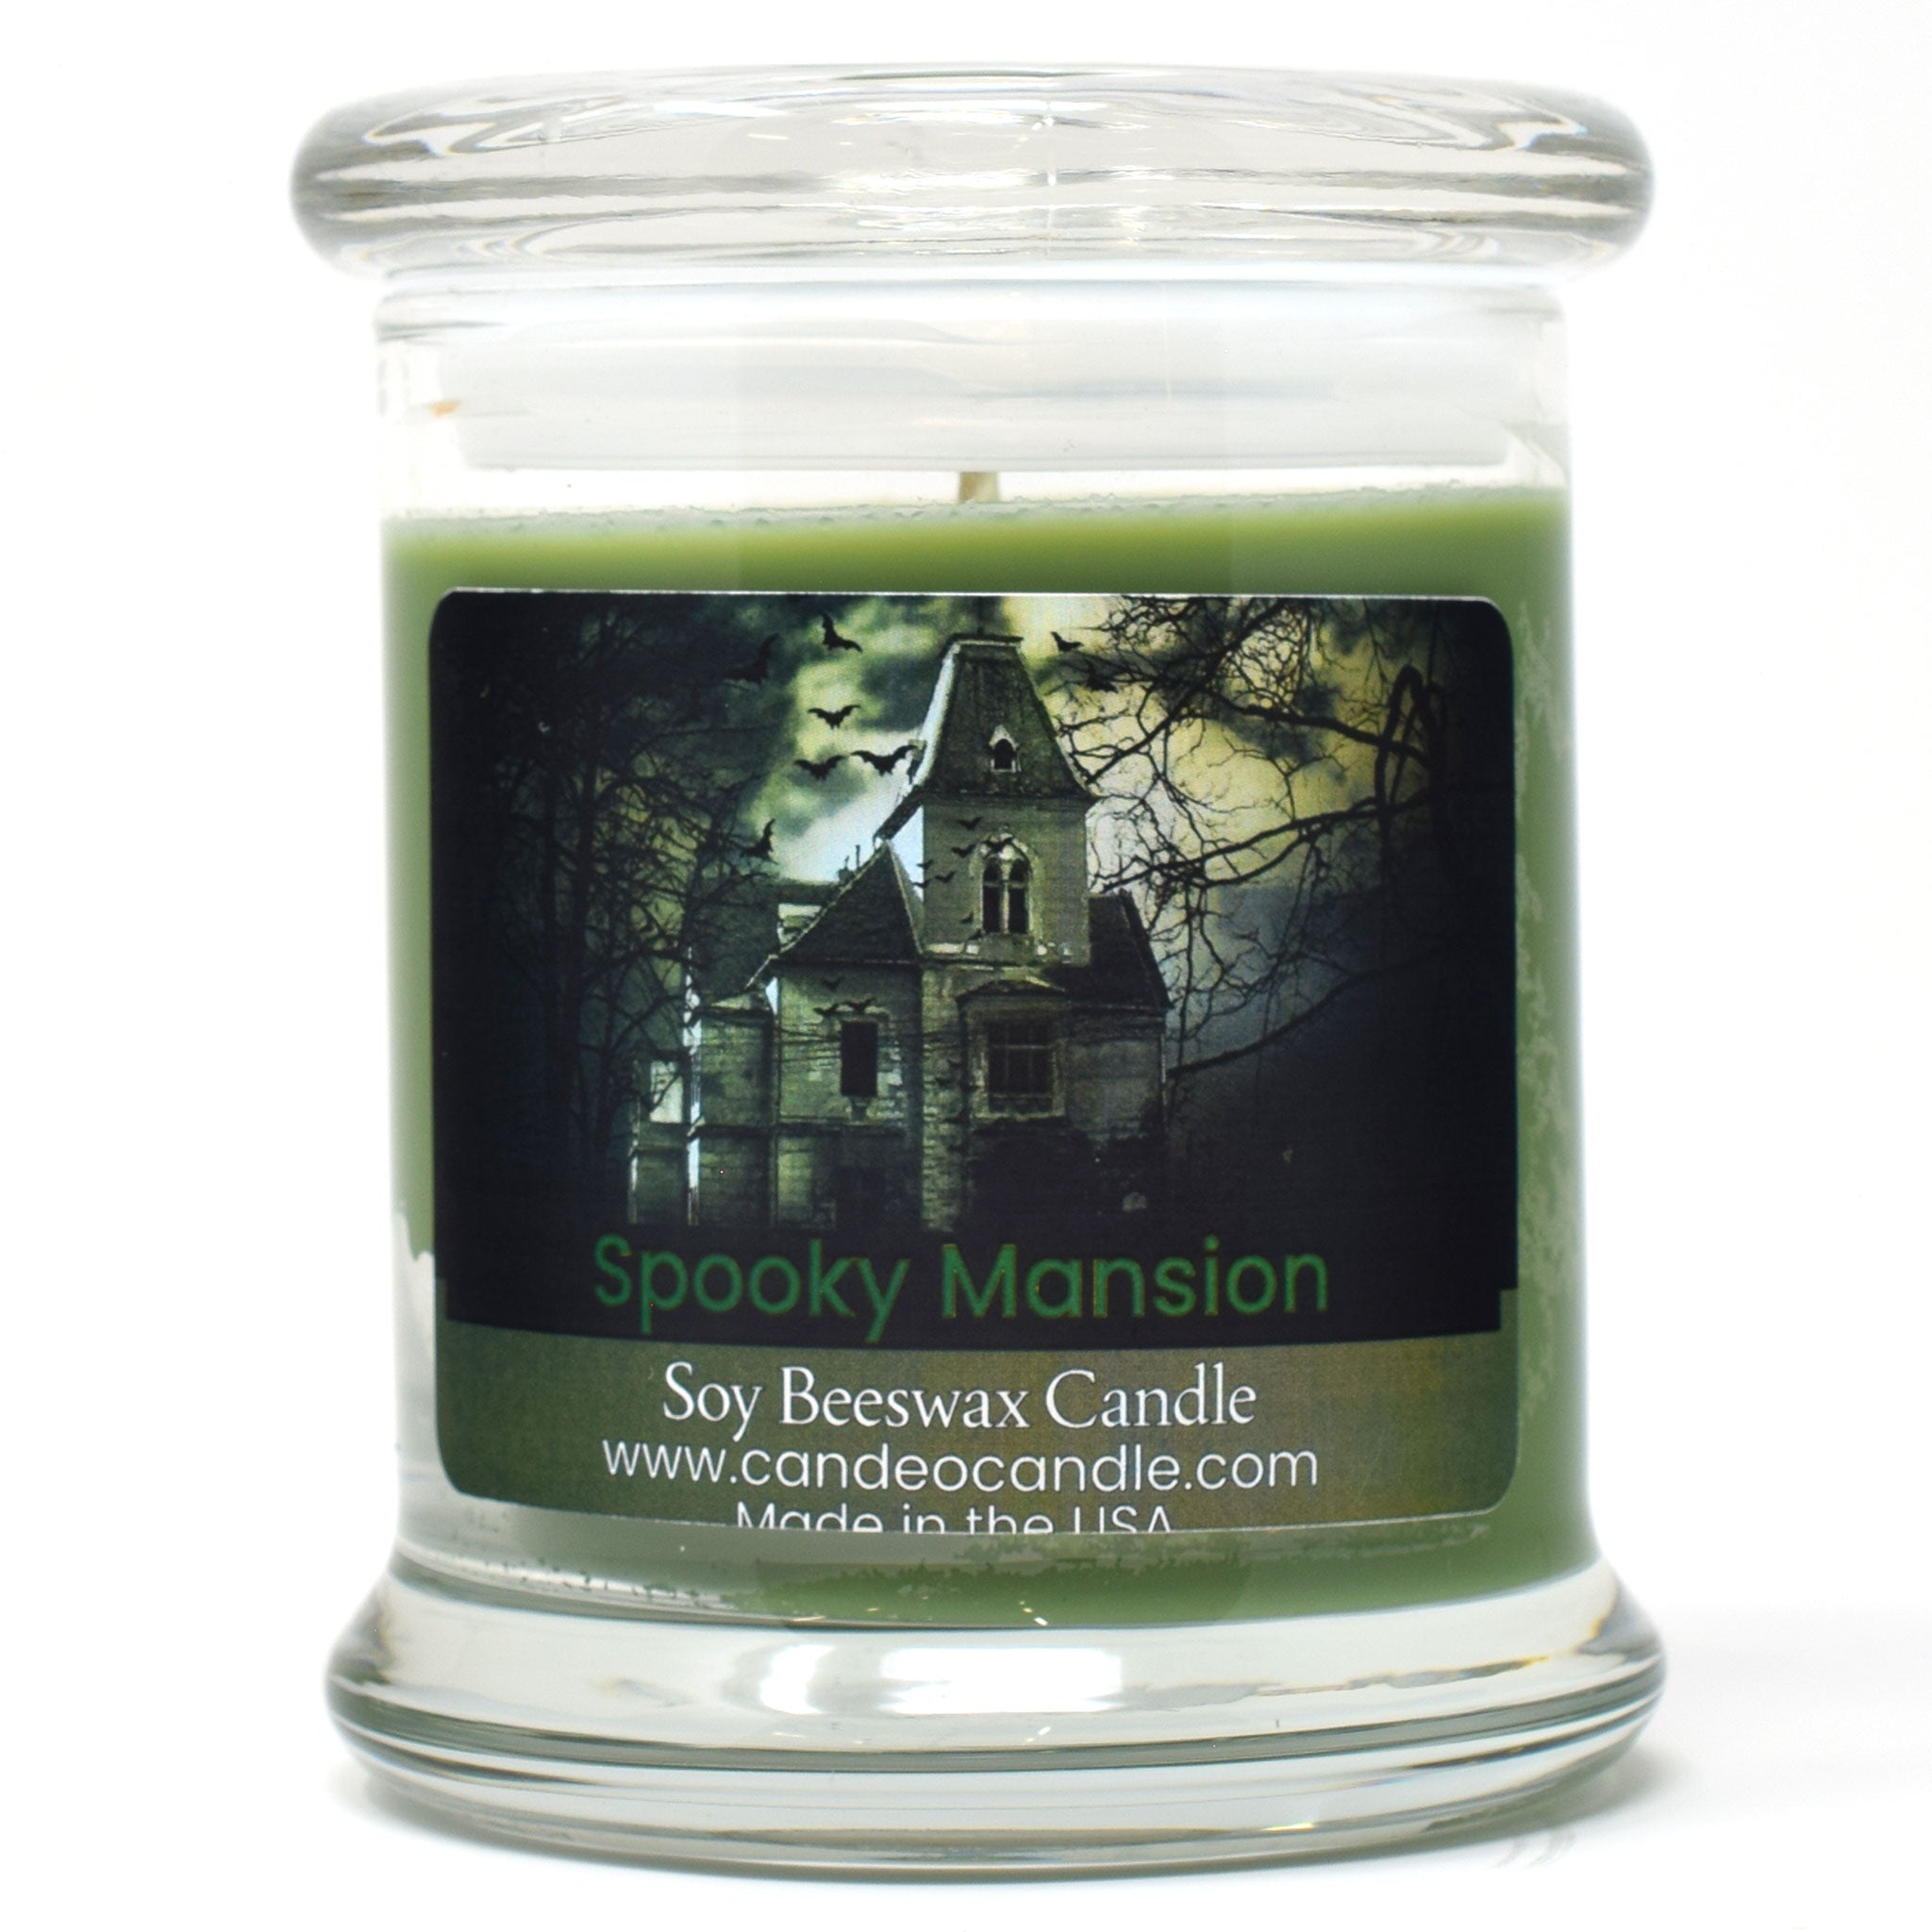 Spooky Mansion, 9oz Soy Candle Jar - Candeo Candle